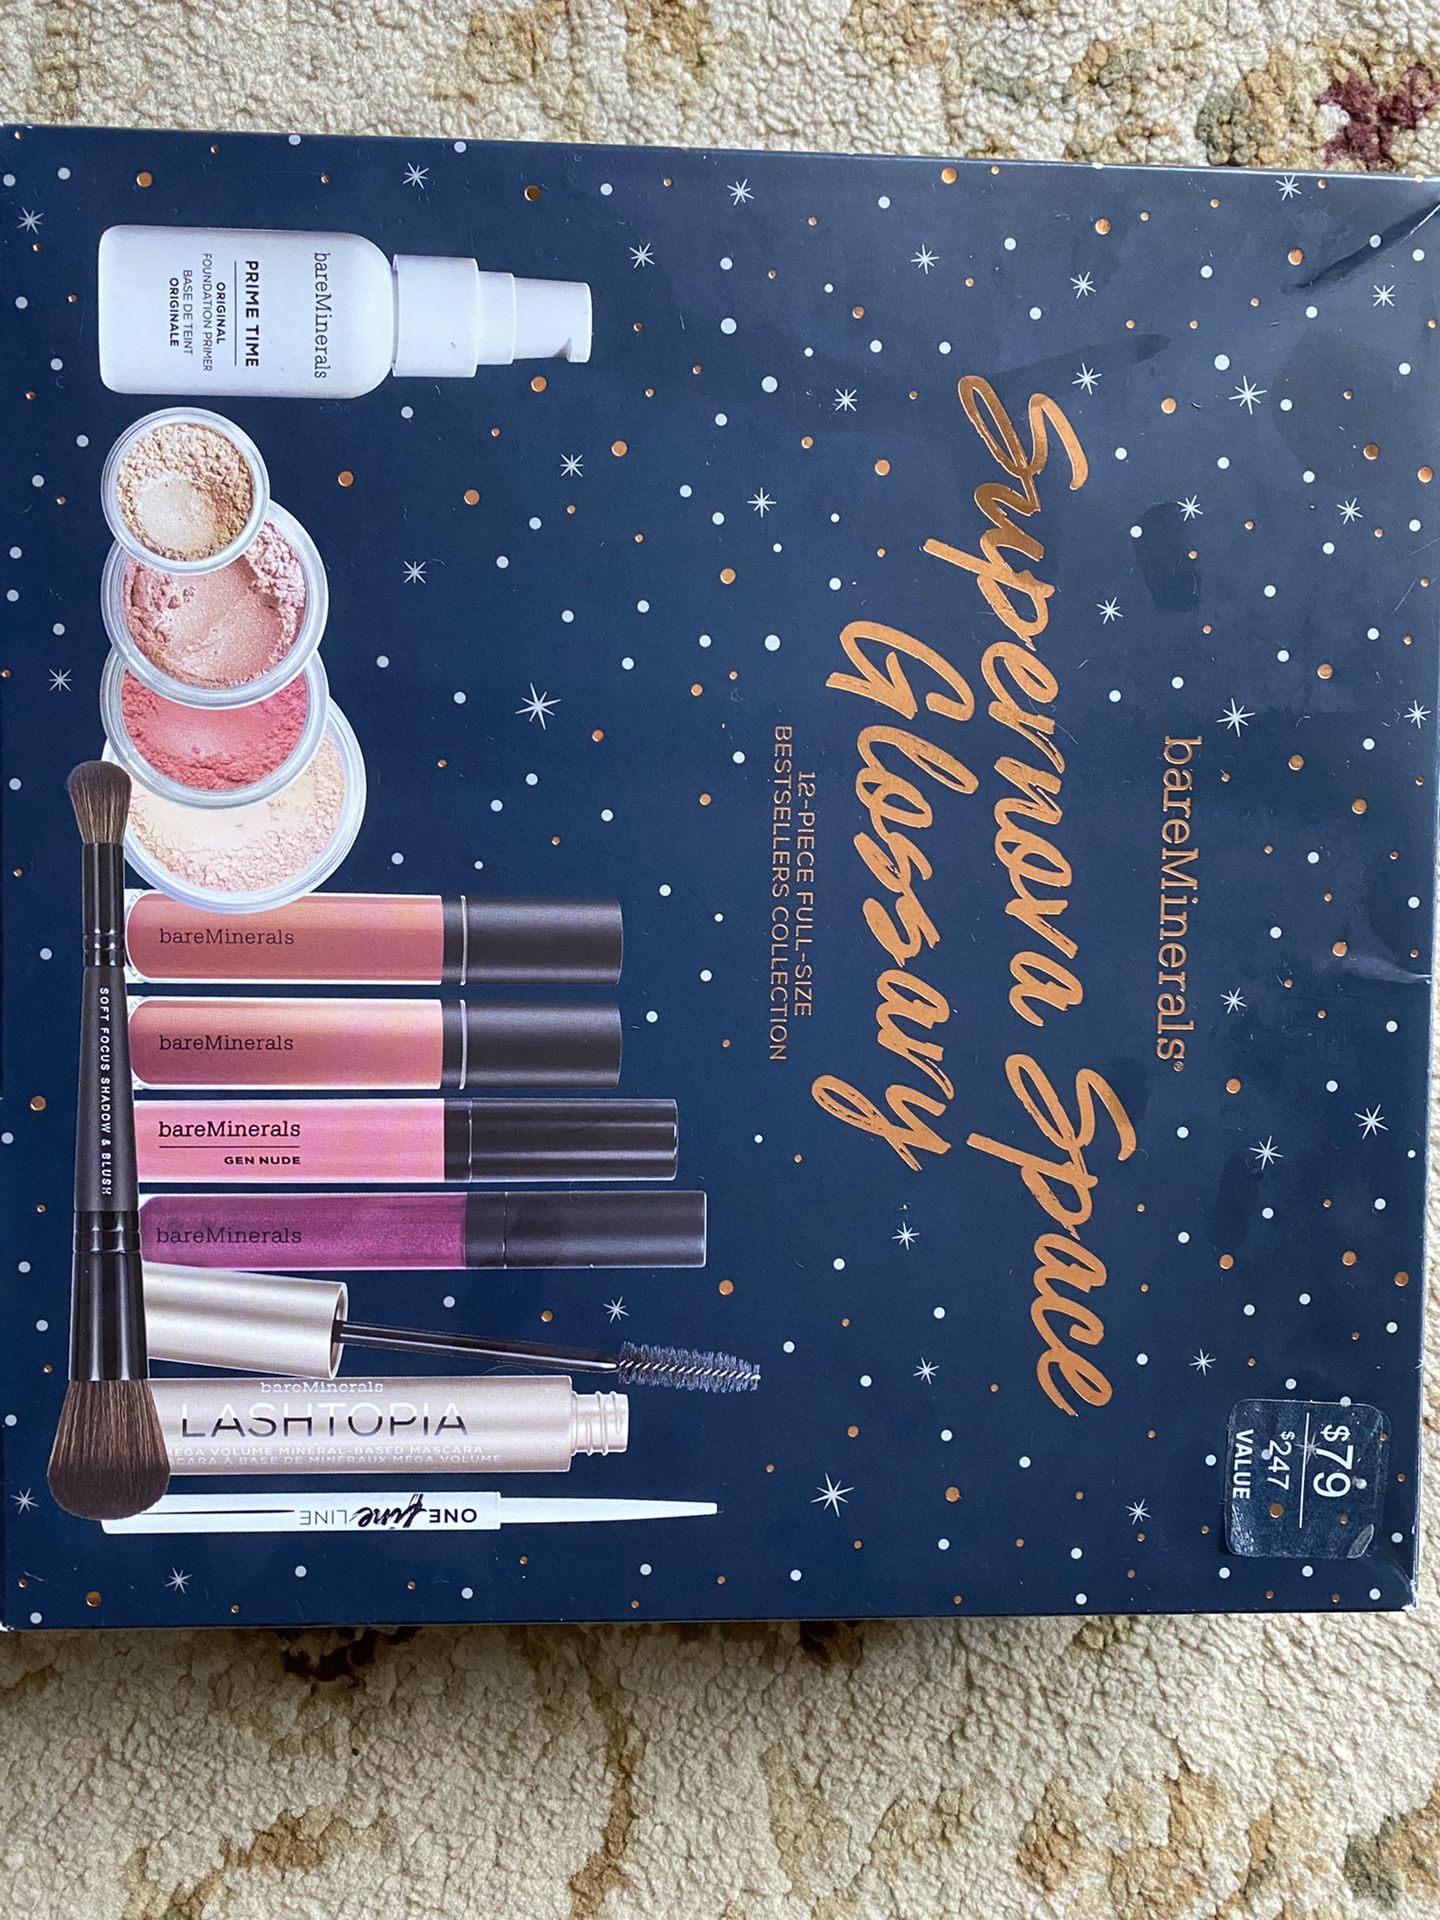 Bare minerals supernova space glossary set 12 piece full product set .